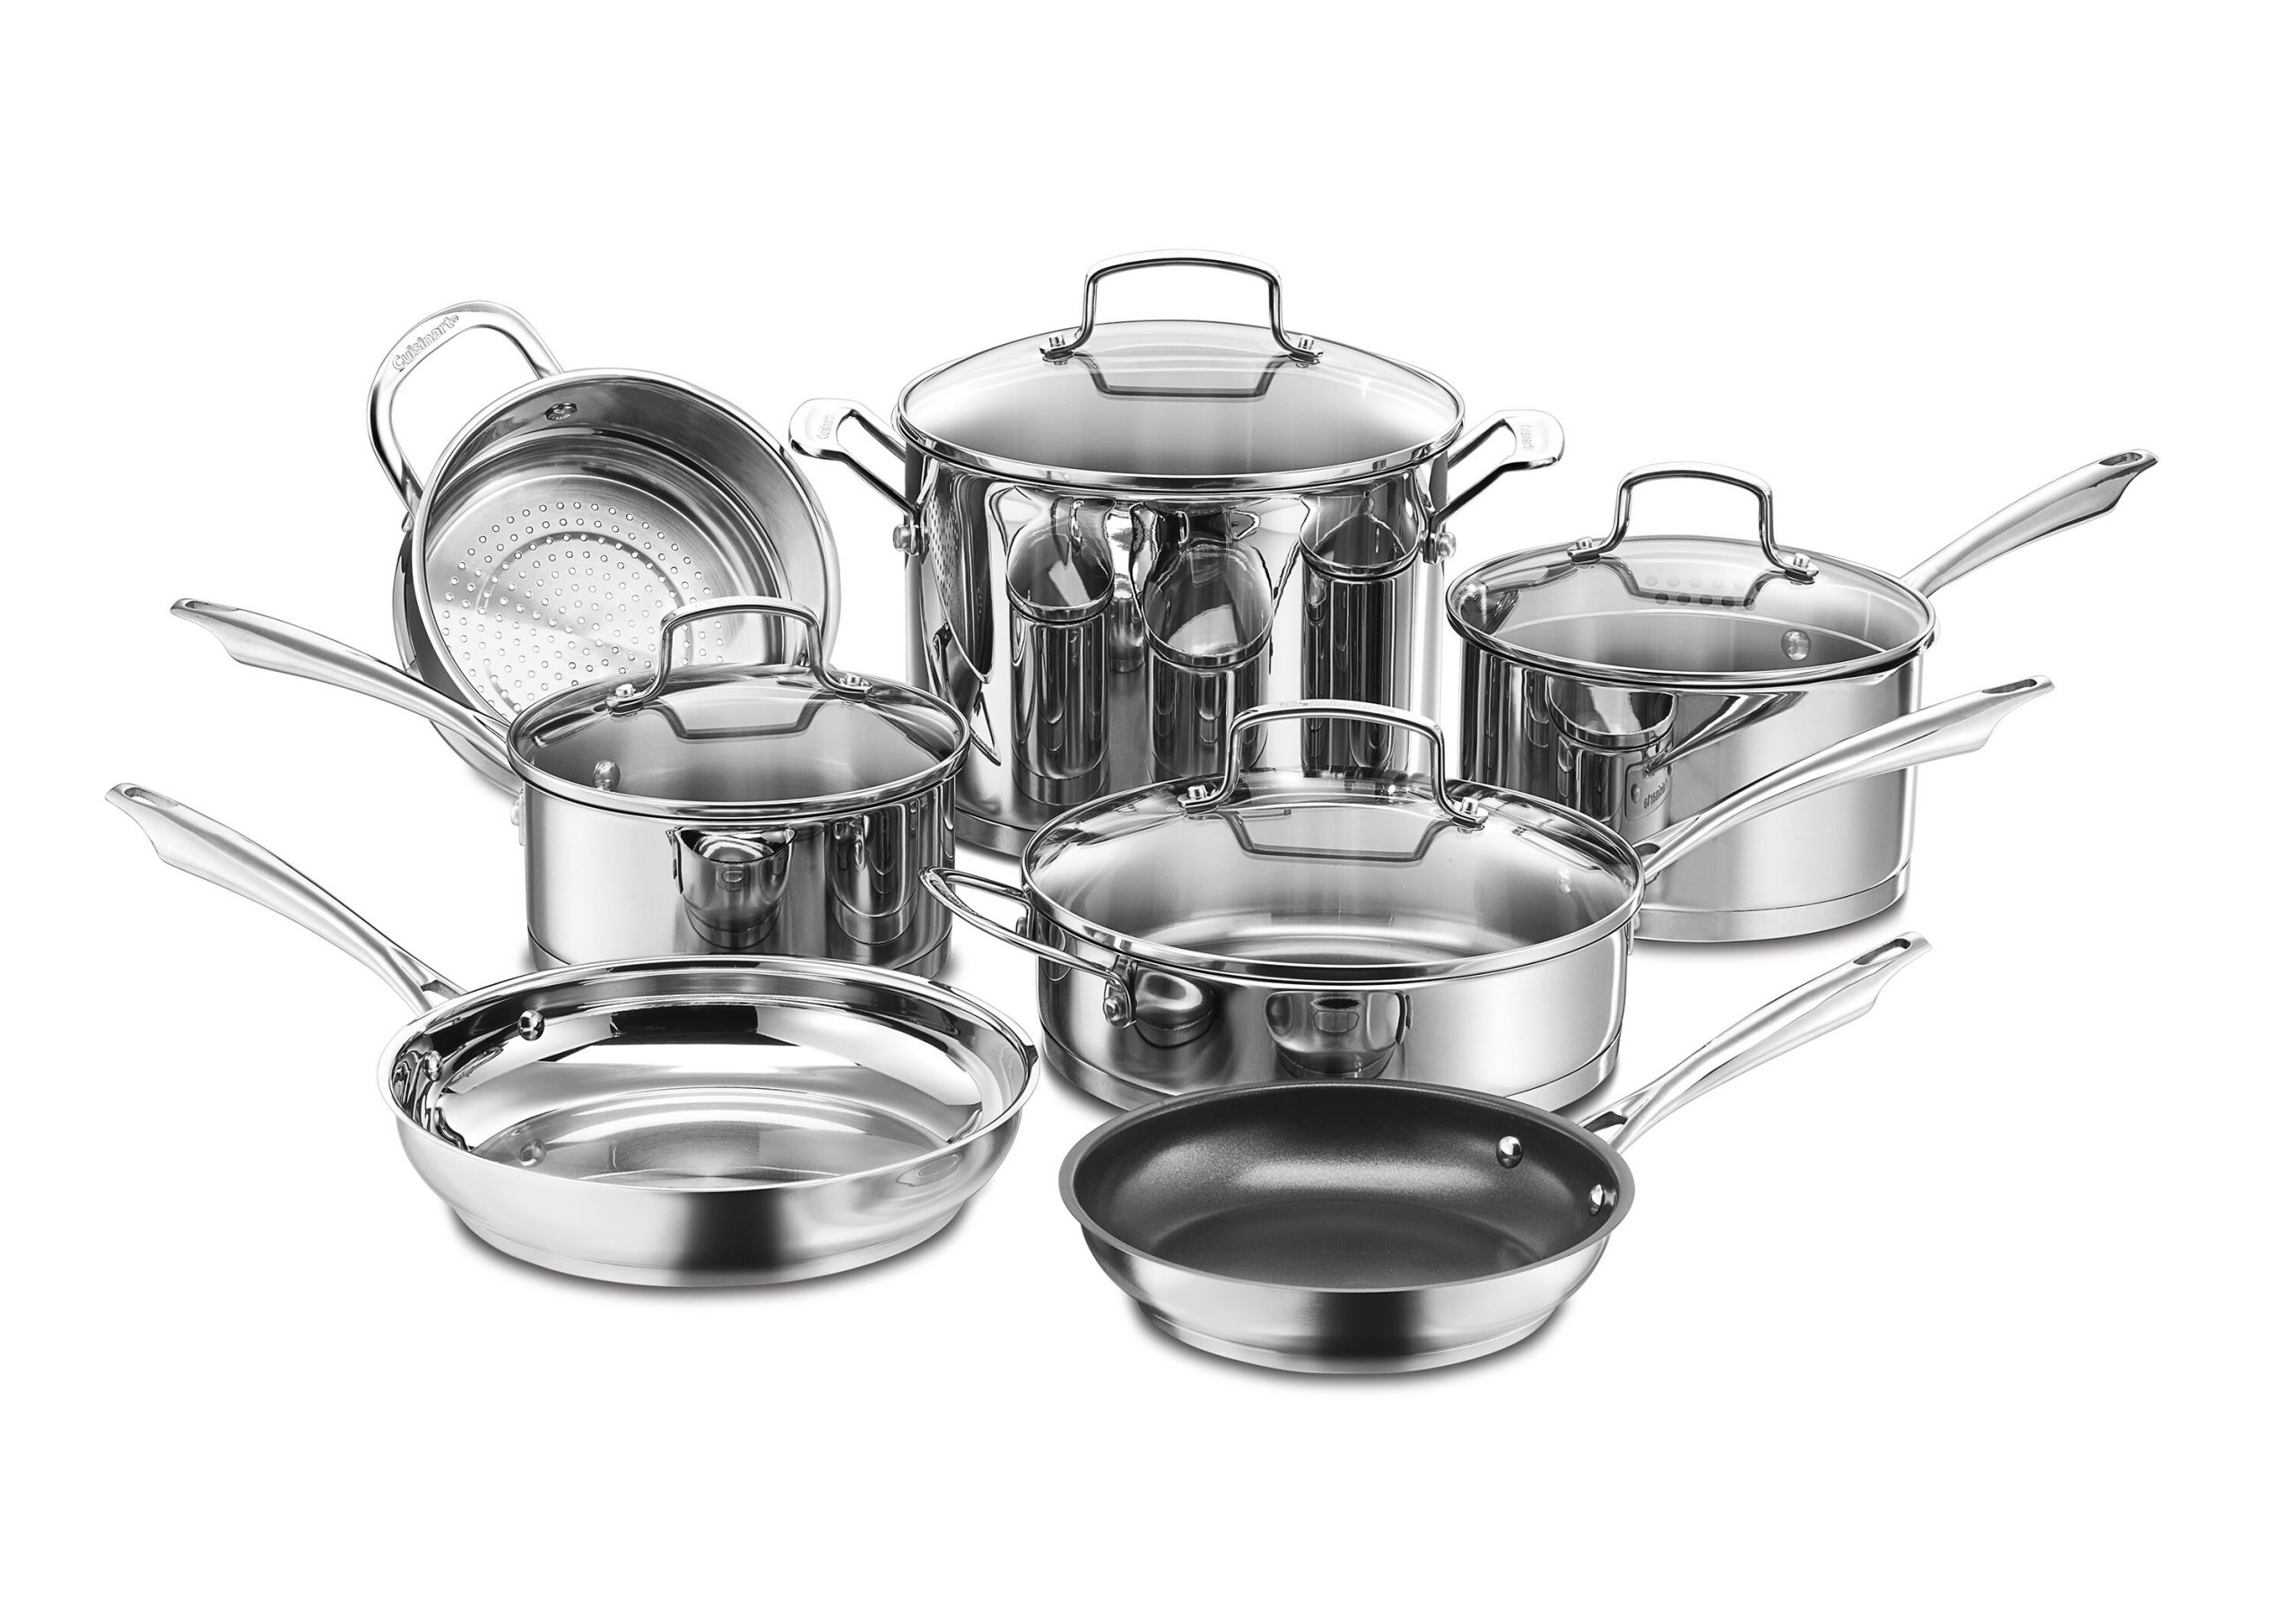 Can stainless steel Cuisinart pans go in oven?